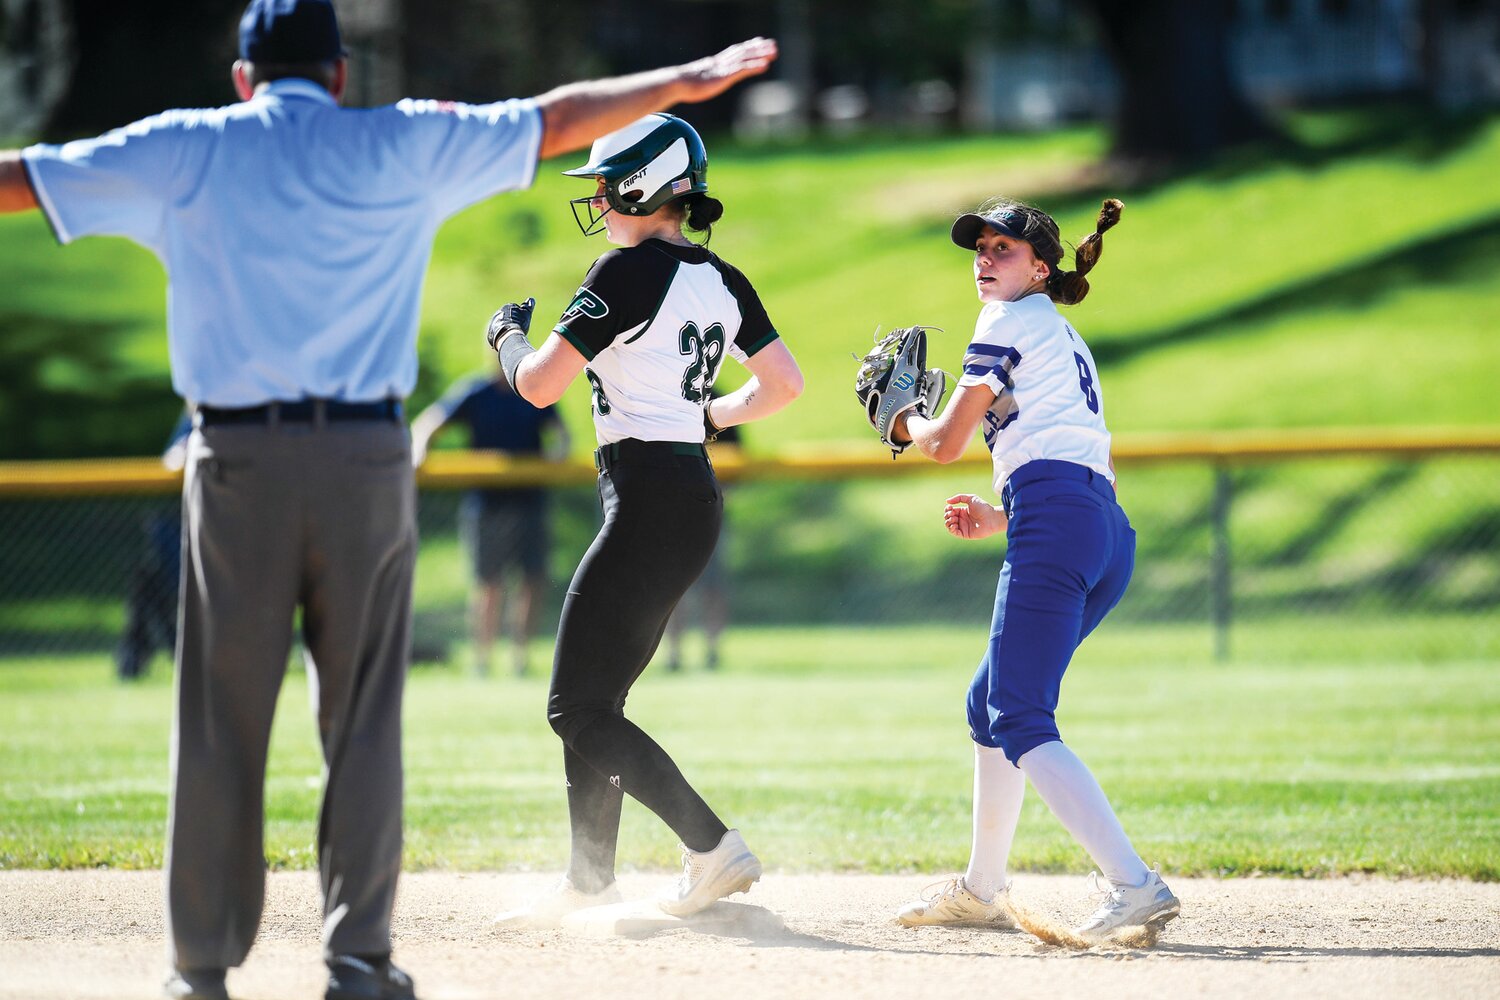 Pennridge’s Ashleigh Kenworthy gets to second base after a double in the fifth inning.